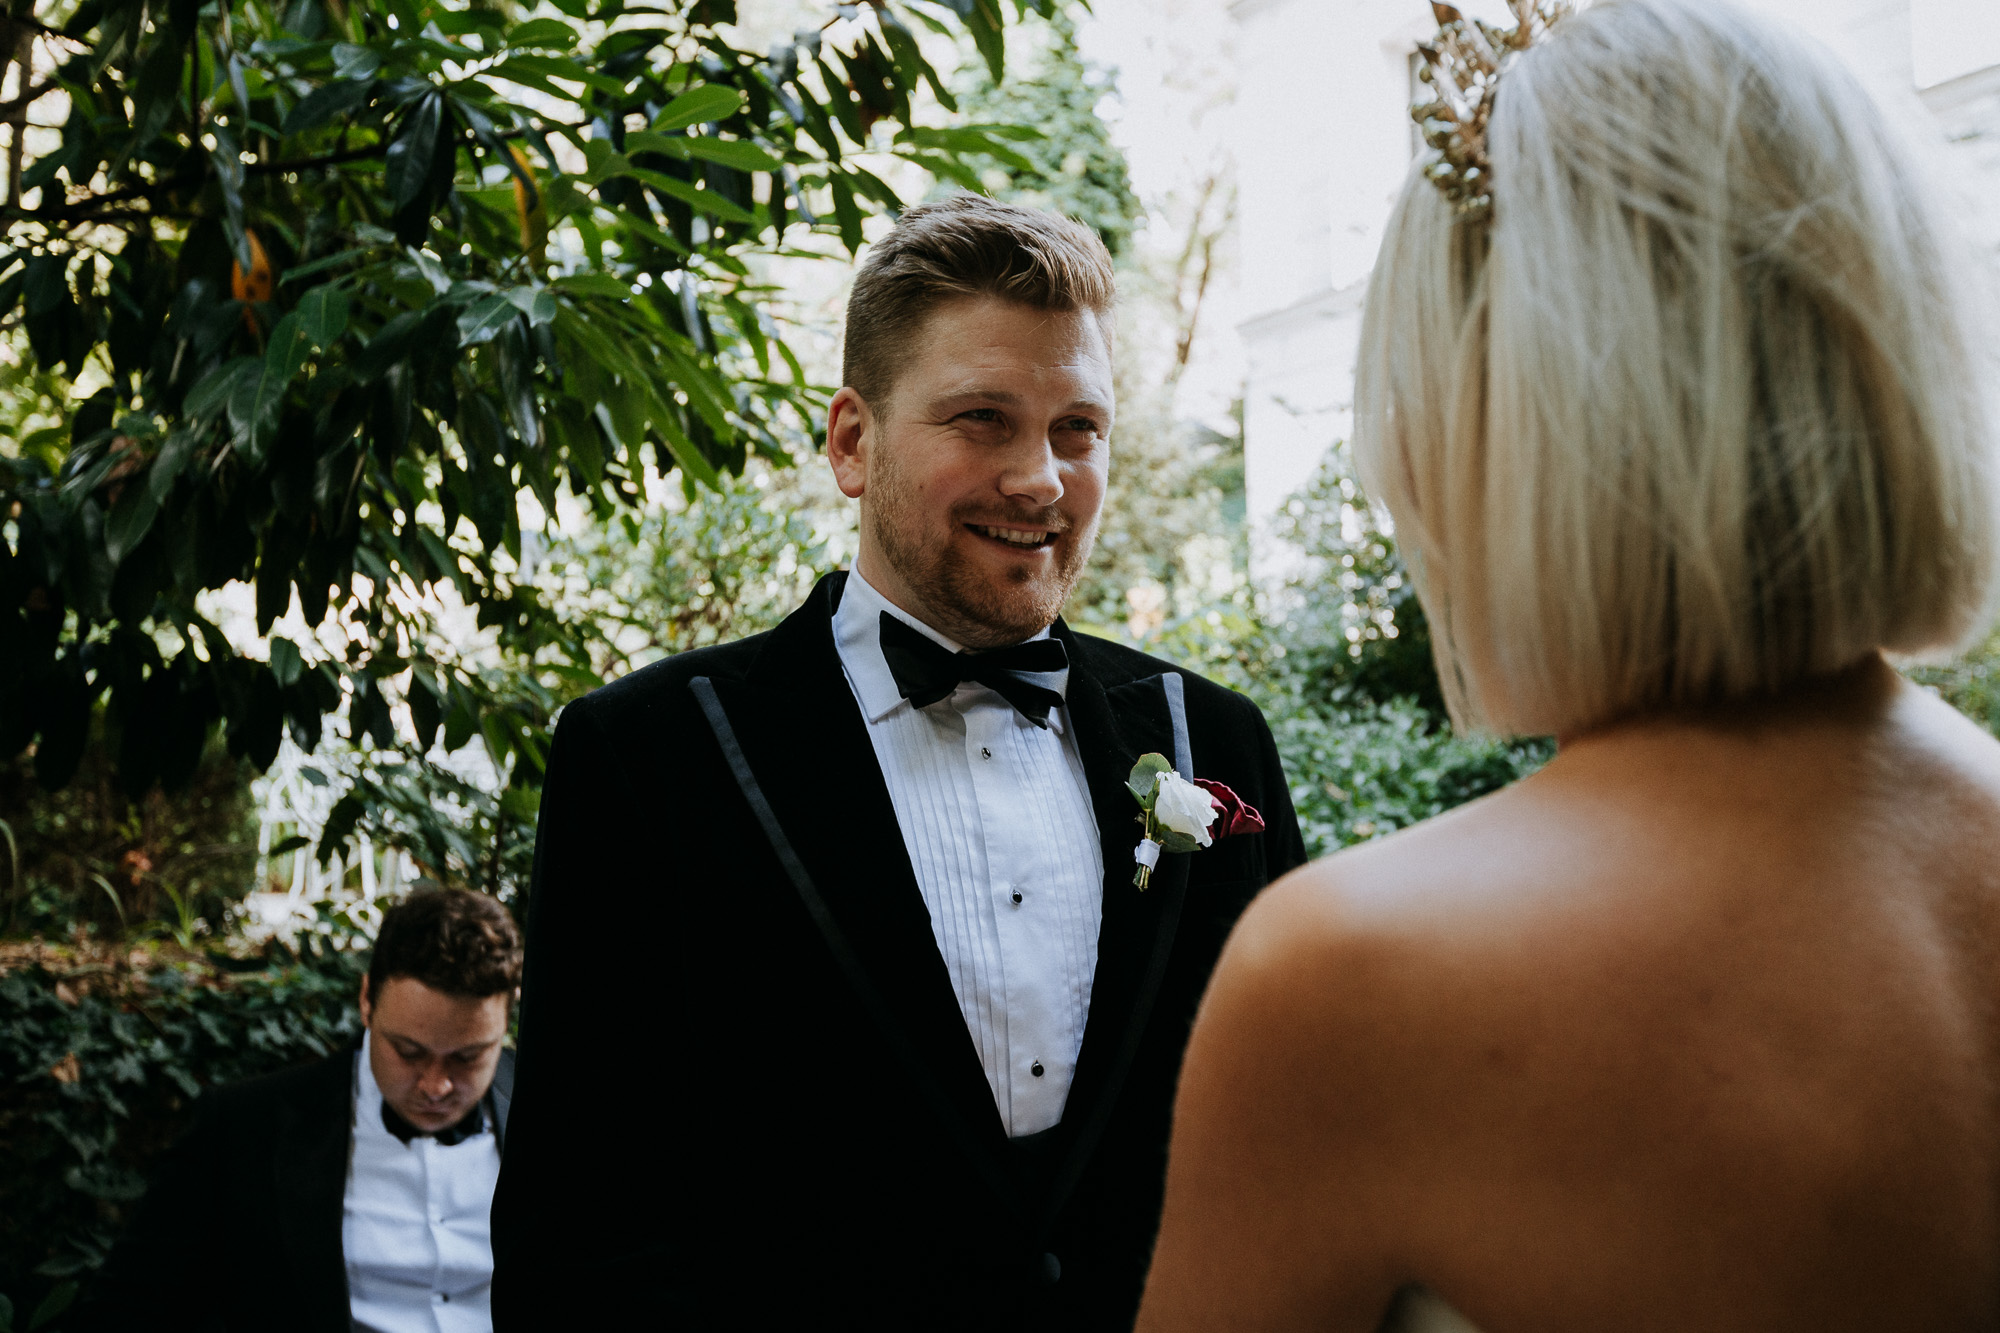 Paris wedding photographer: the groom lovingly looks at his wife during their wedding ceremony